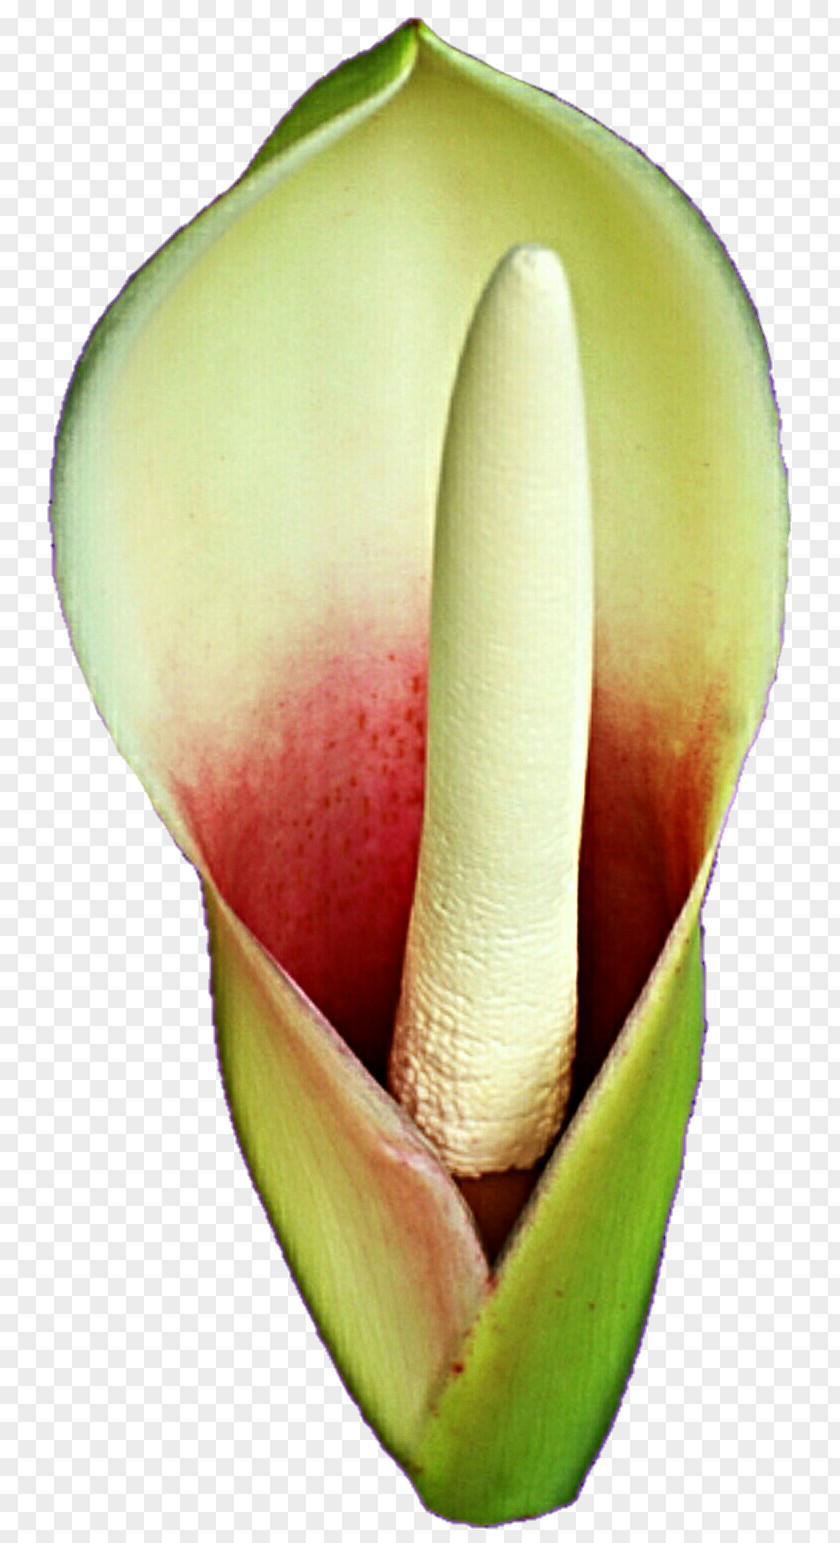 Callalily Arum Lilies Melon Fruit PNG